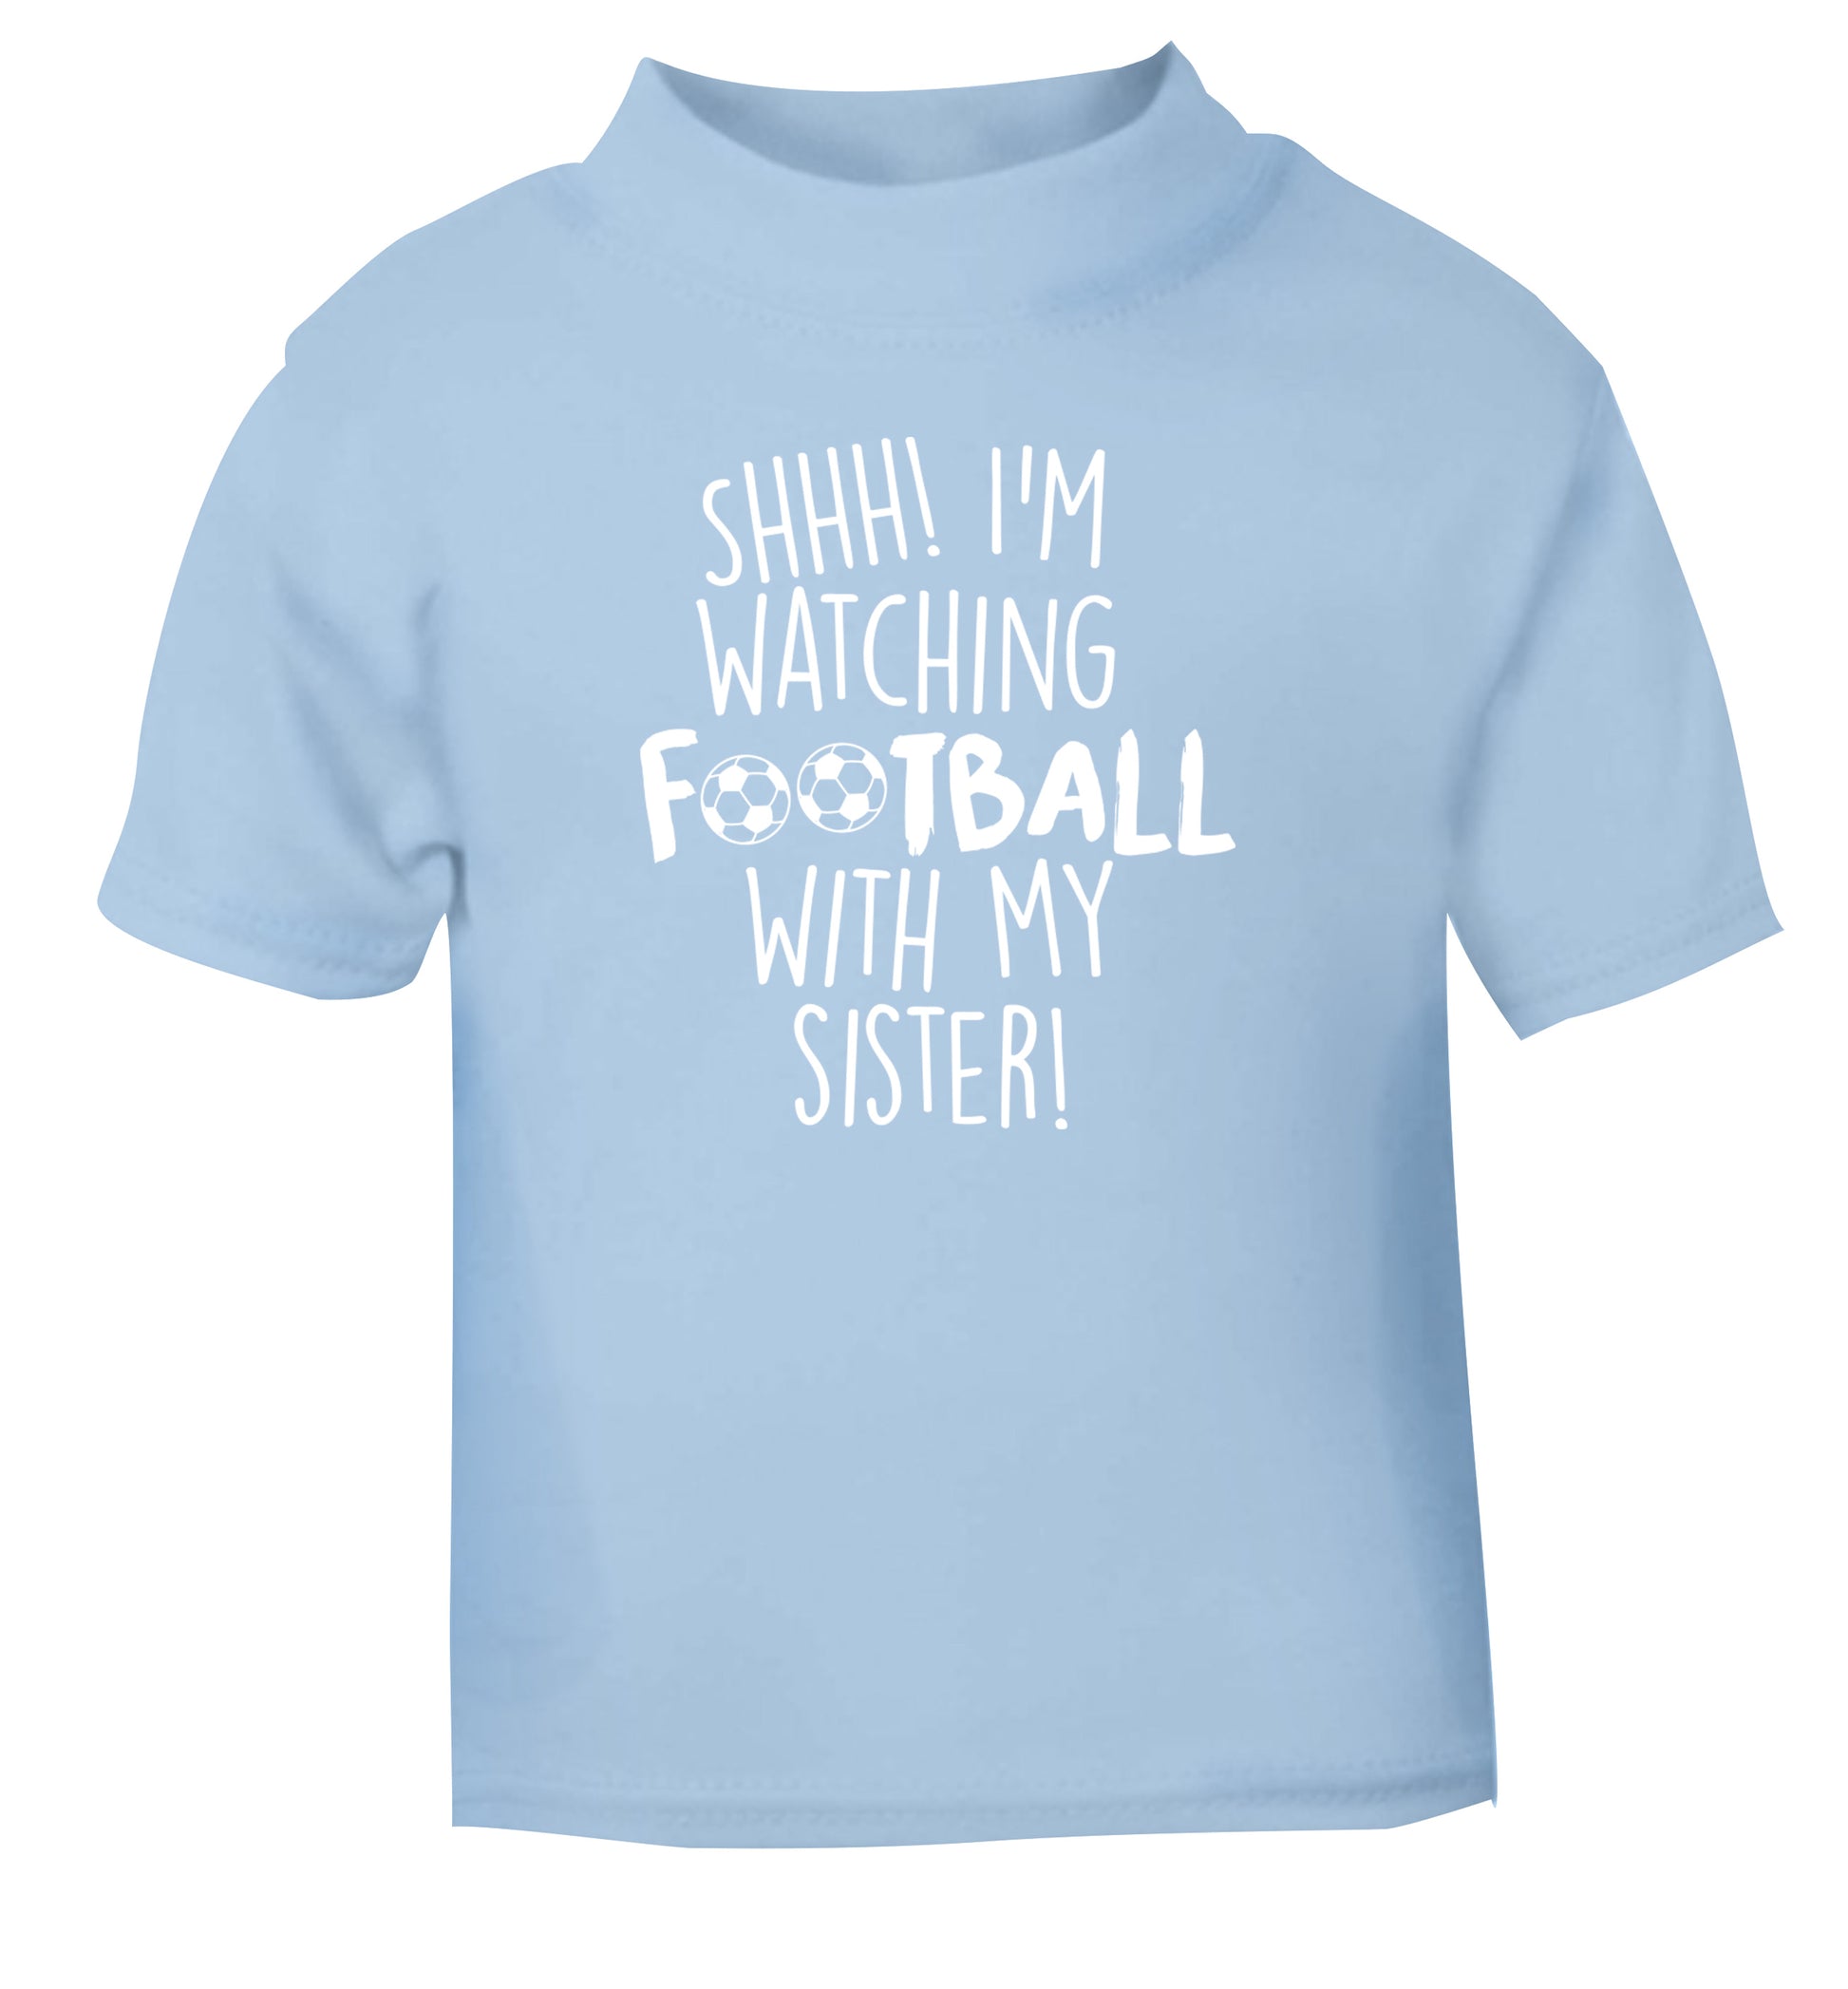 Shhh I'm watching football with my sister light blue Baby Toddler Tshirt 2 Years